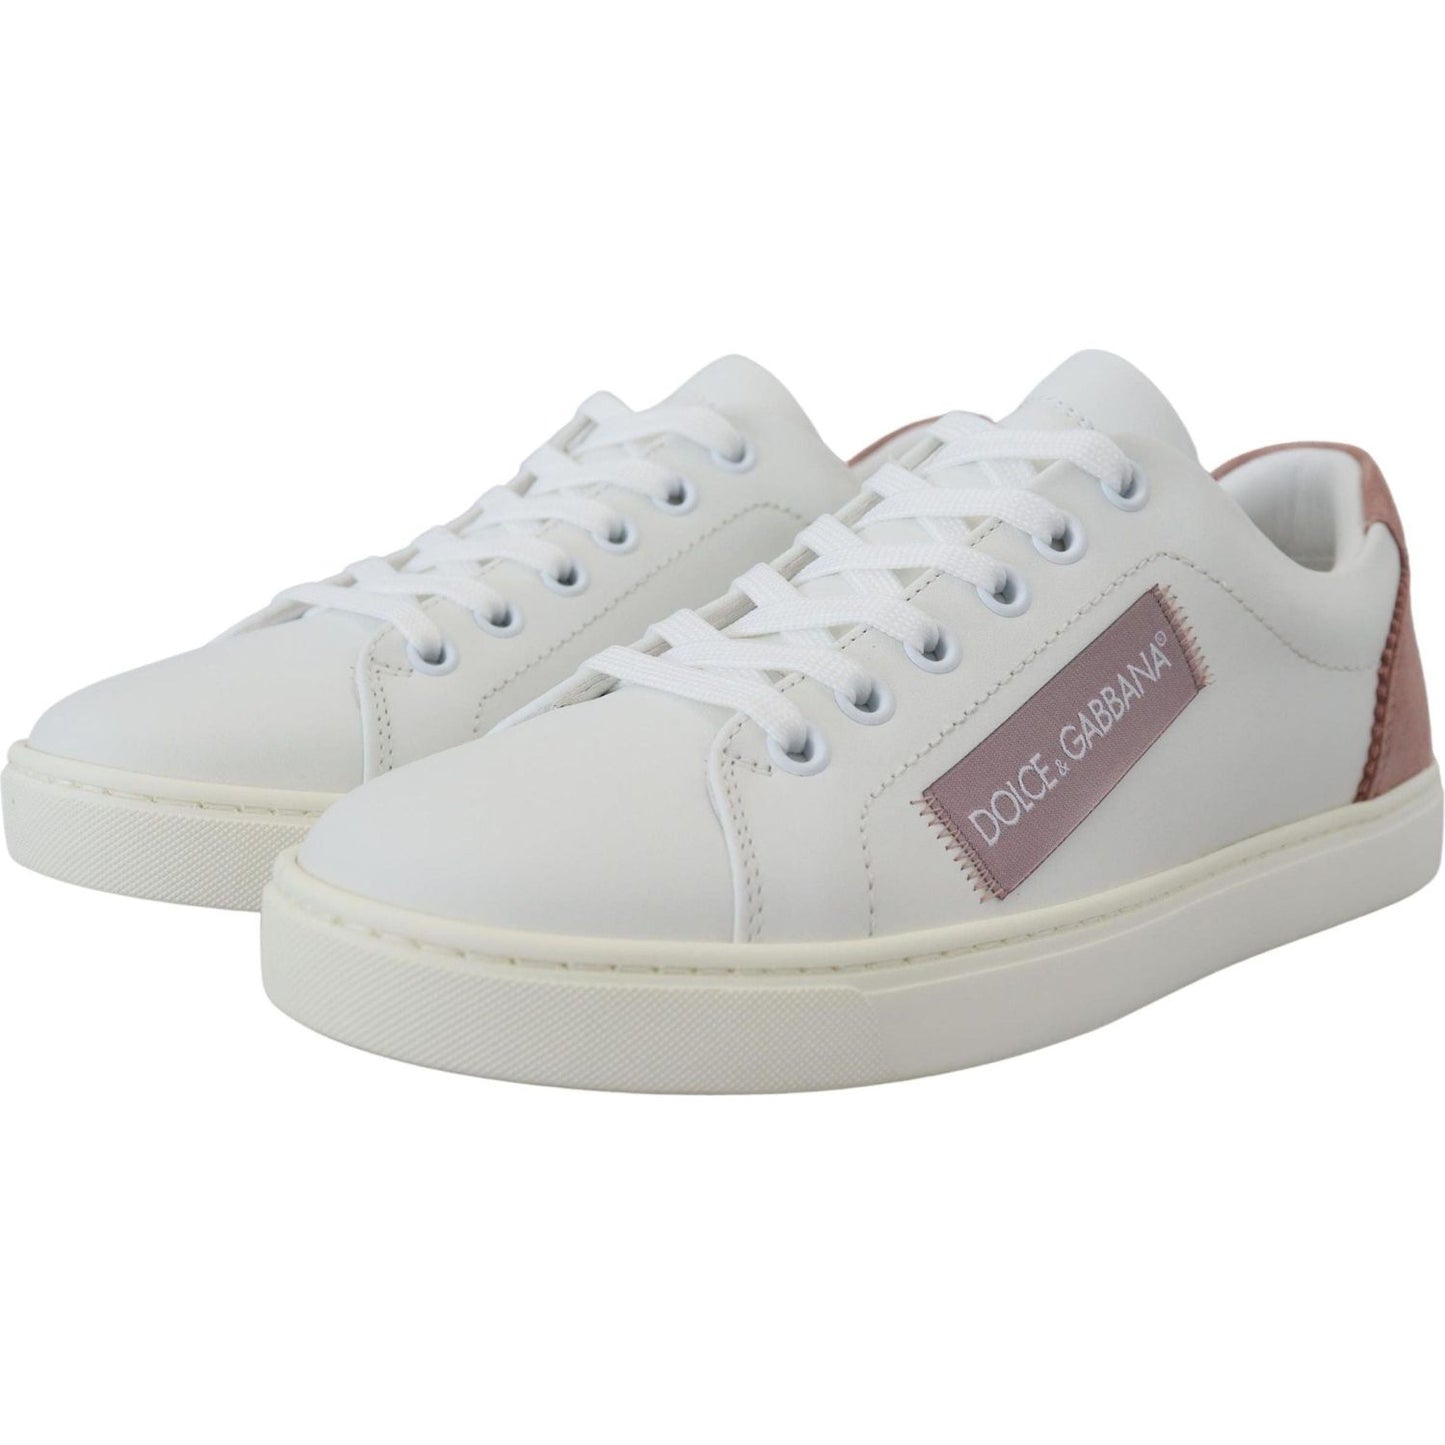 Dolce & Gabbana Chic White Pink Leather Low-Top Sneakers white-pink-leather-low-top-sneakers-shoes